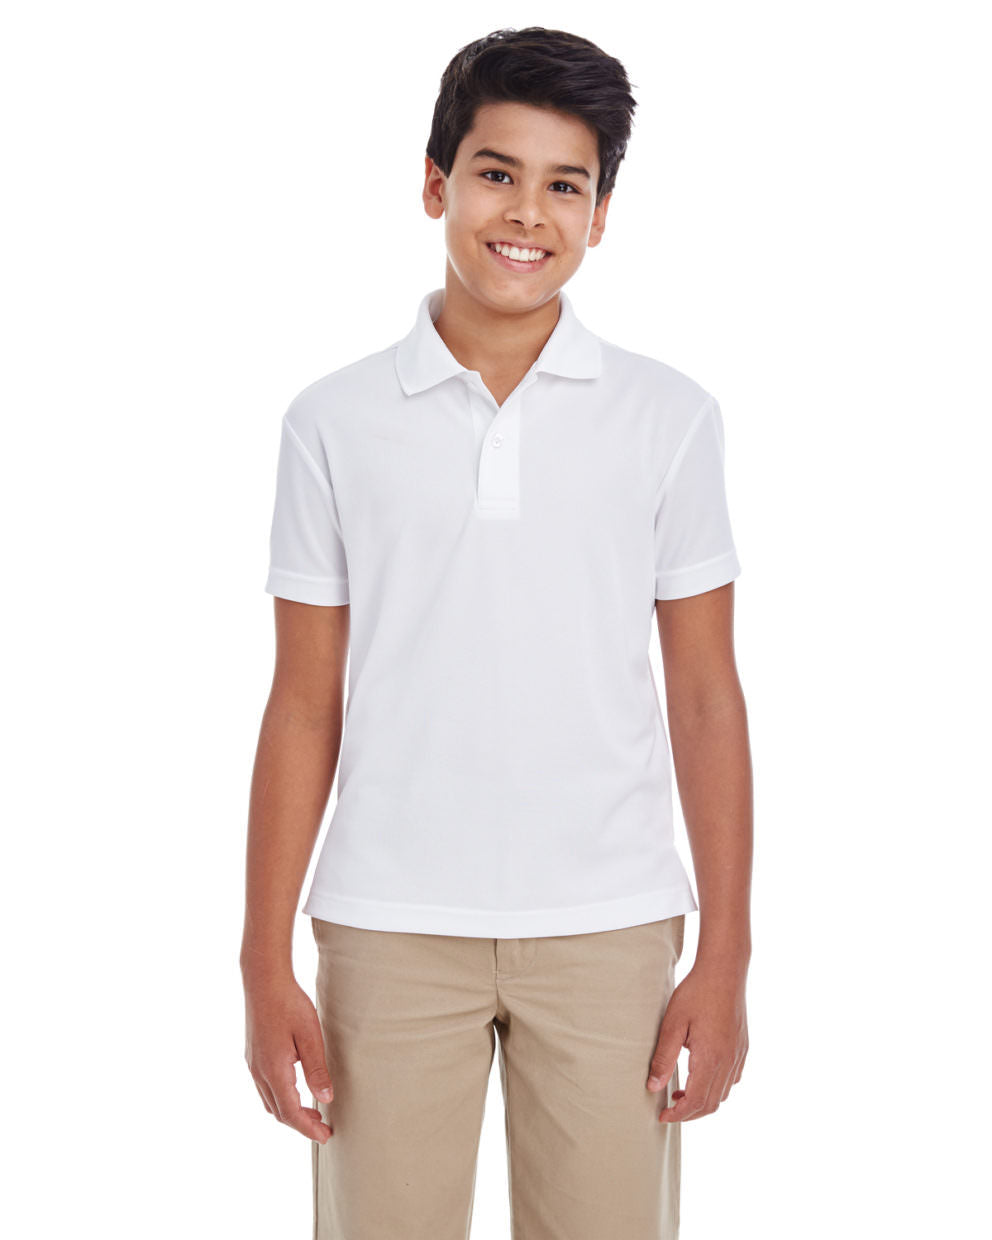 Youth Softest Performance Polo